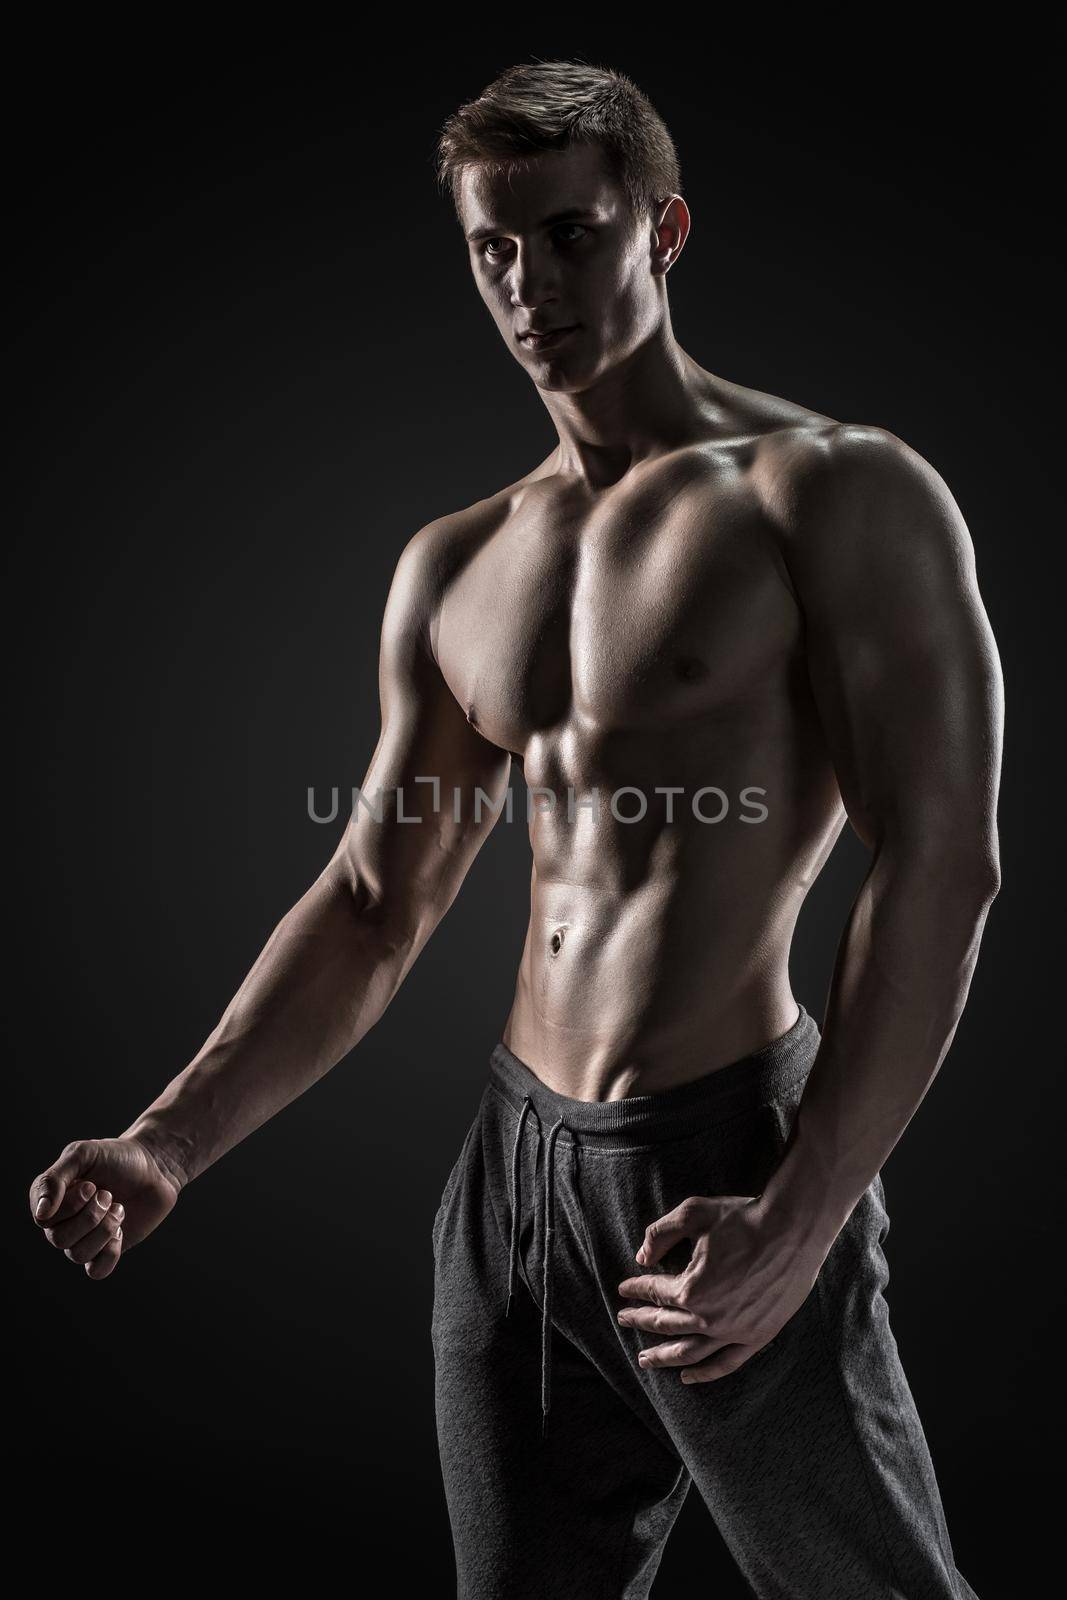 Sexy shirtless bodybuilder posing and looking at camera on black background. Extreme strength, muscles and fitness.